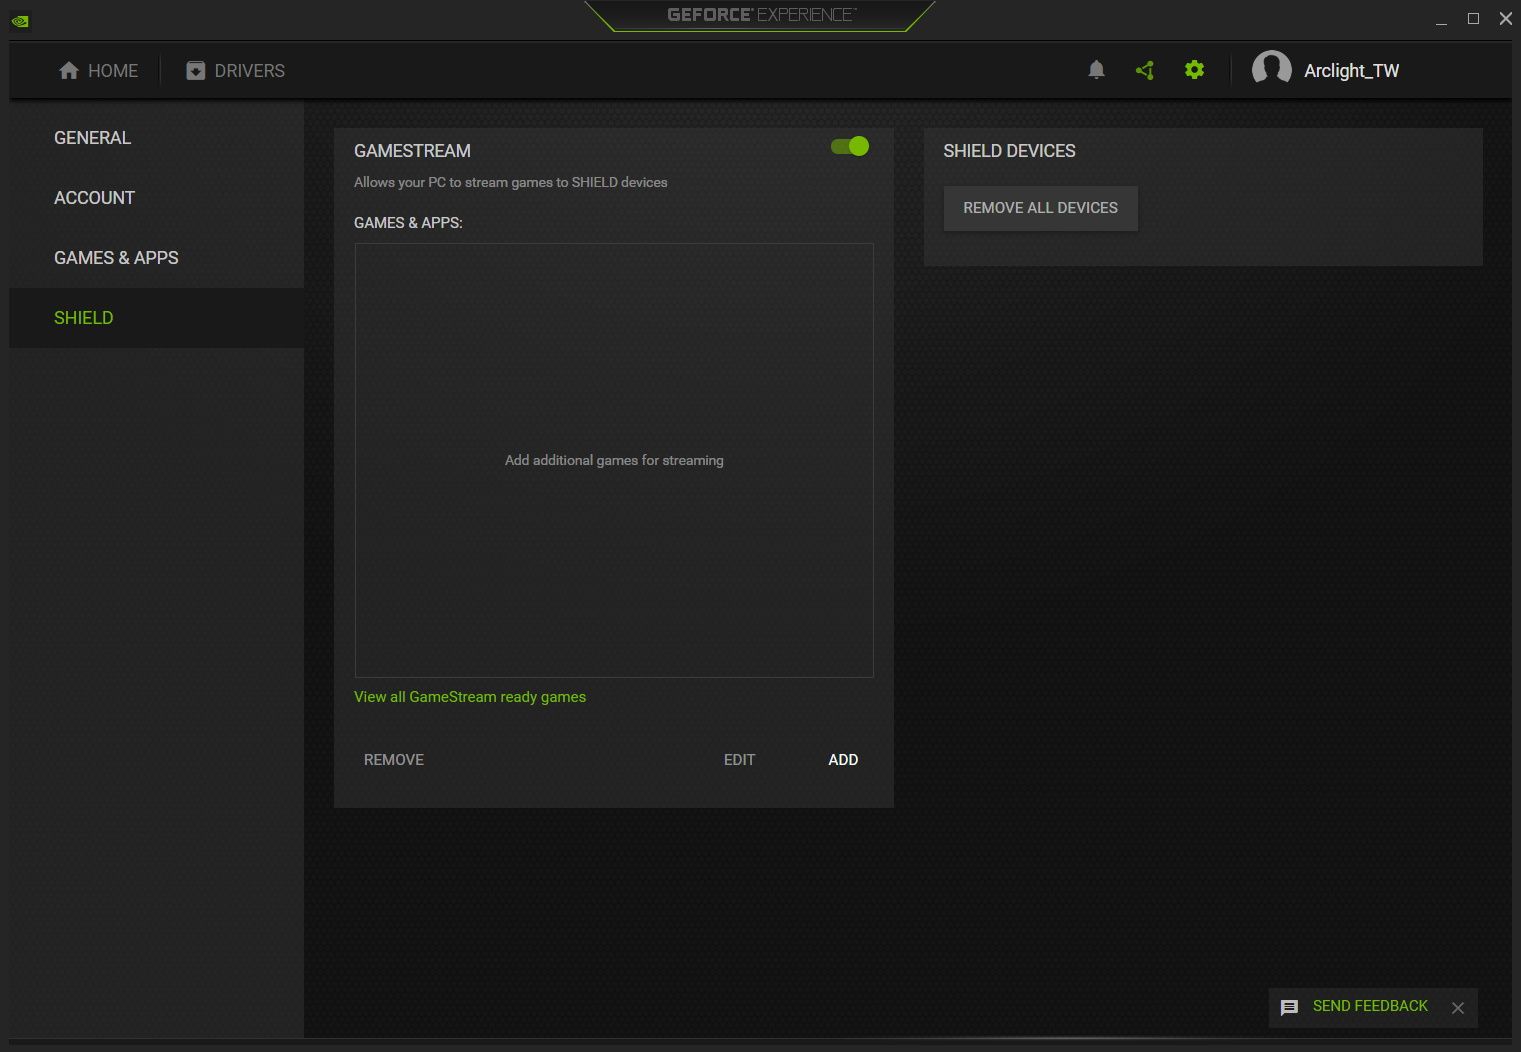 The SHIELD tab of NVIDIA GeForce Experience showing Game Stream as being enabled.